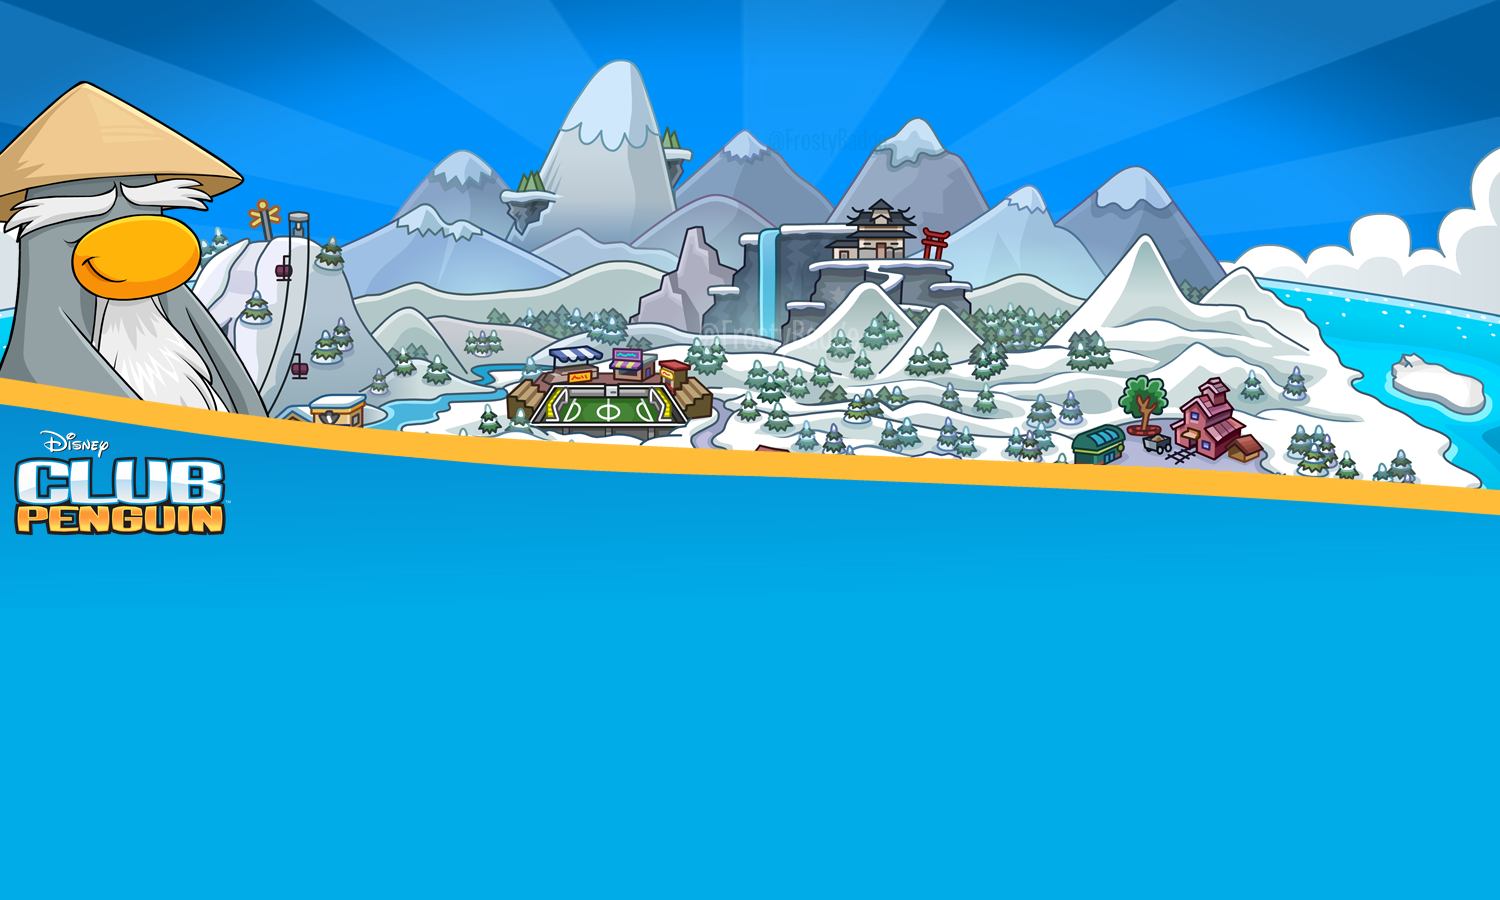 Free Club Penguin Twitter Backgrounds (Page: 1/2) | Everything ...